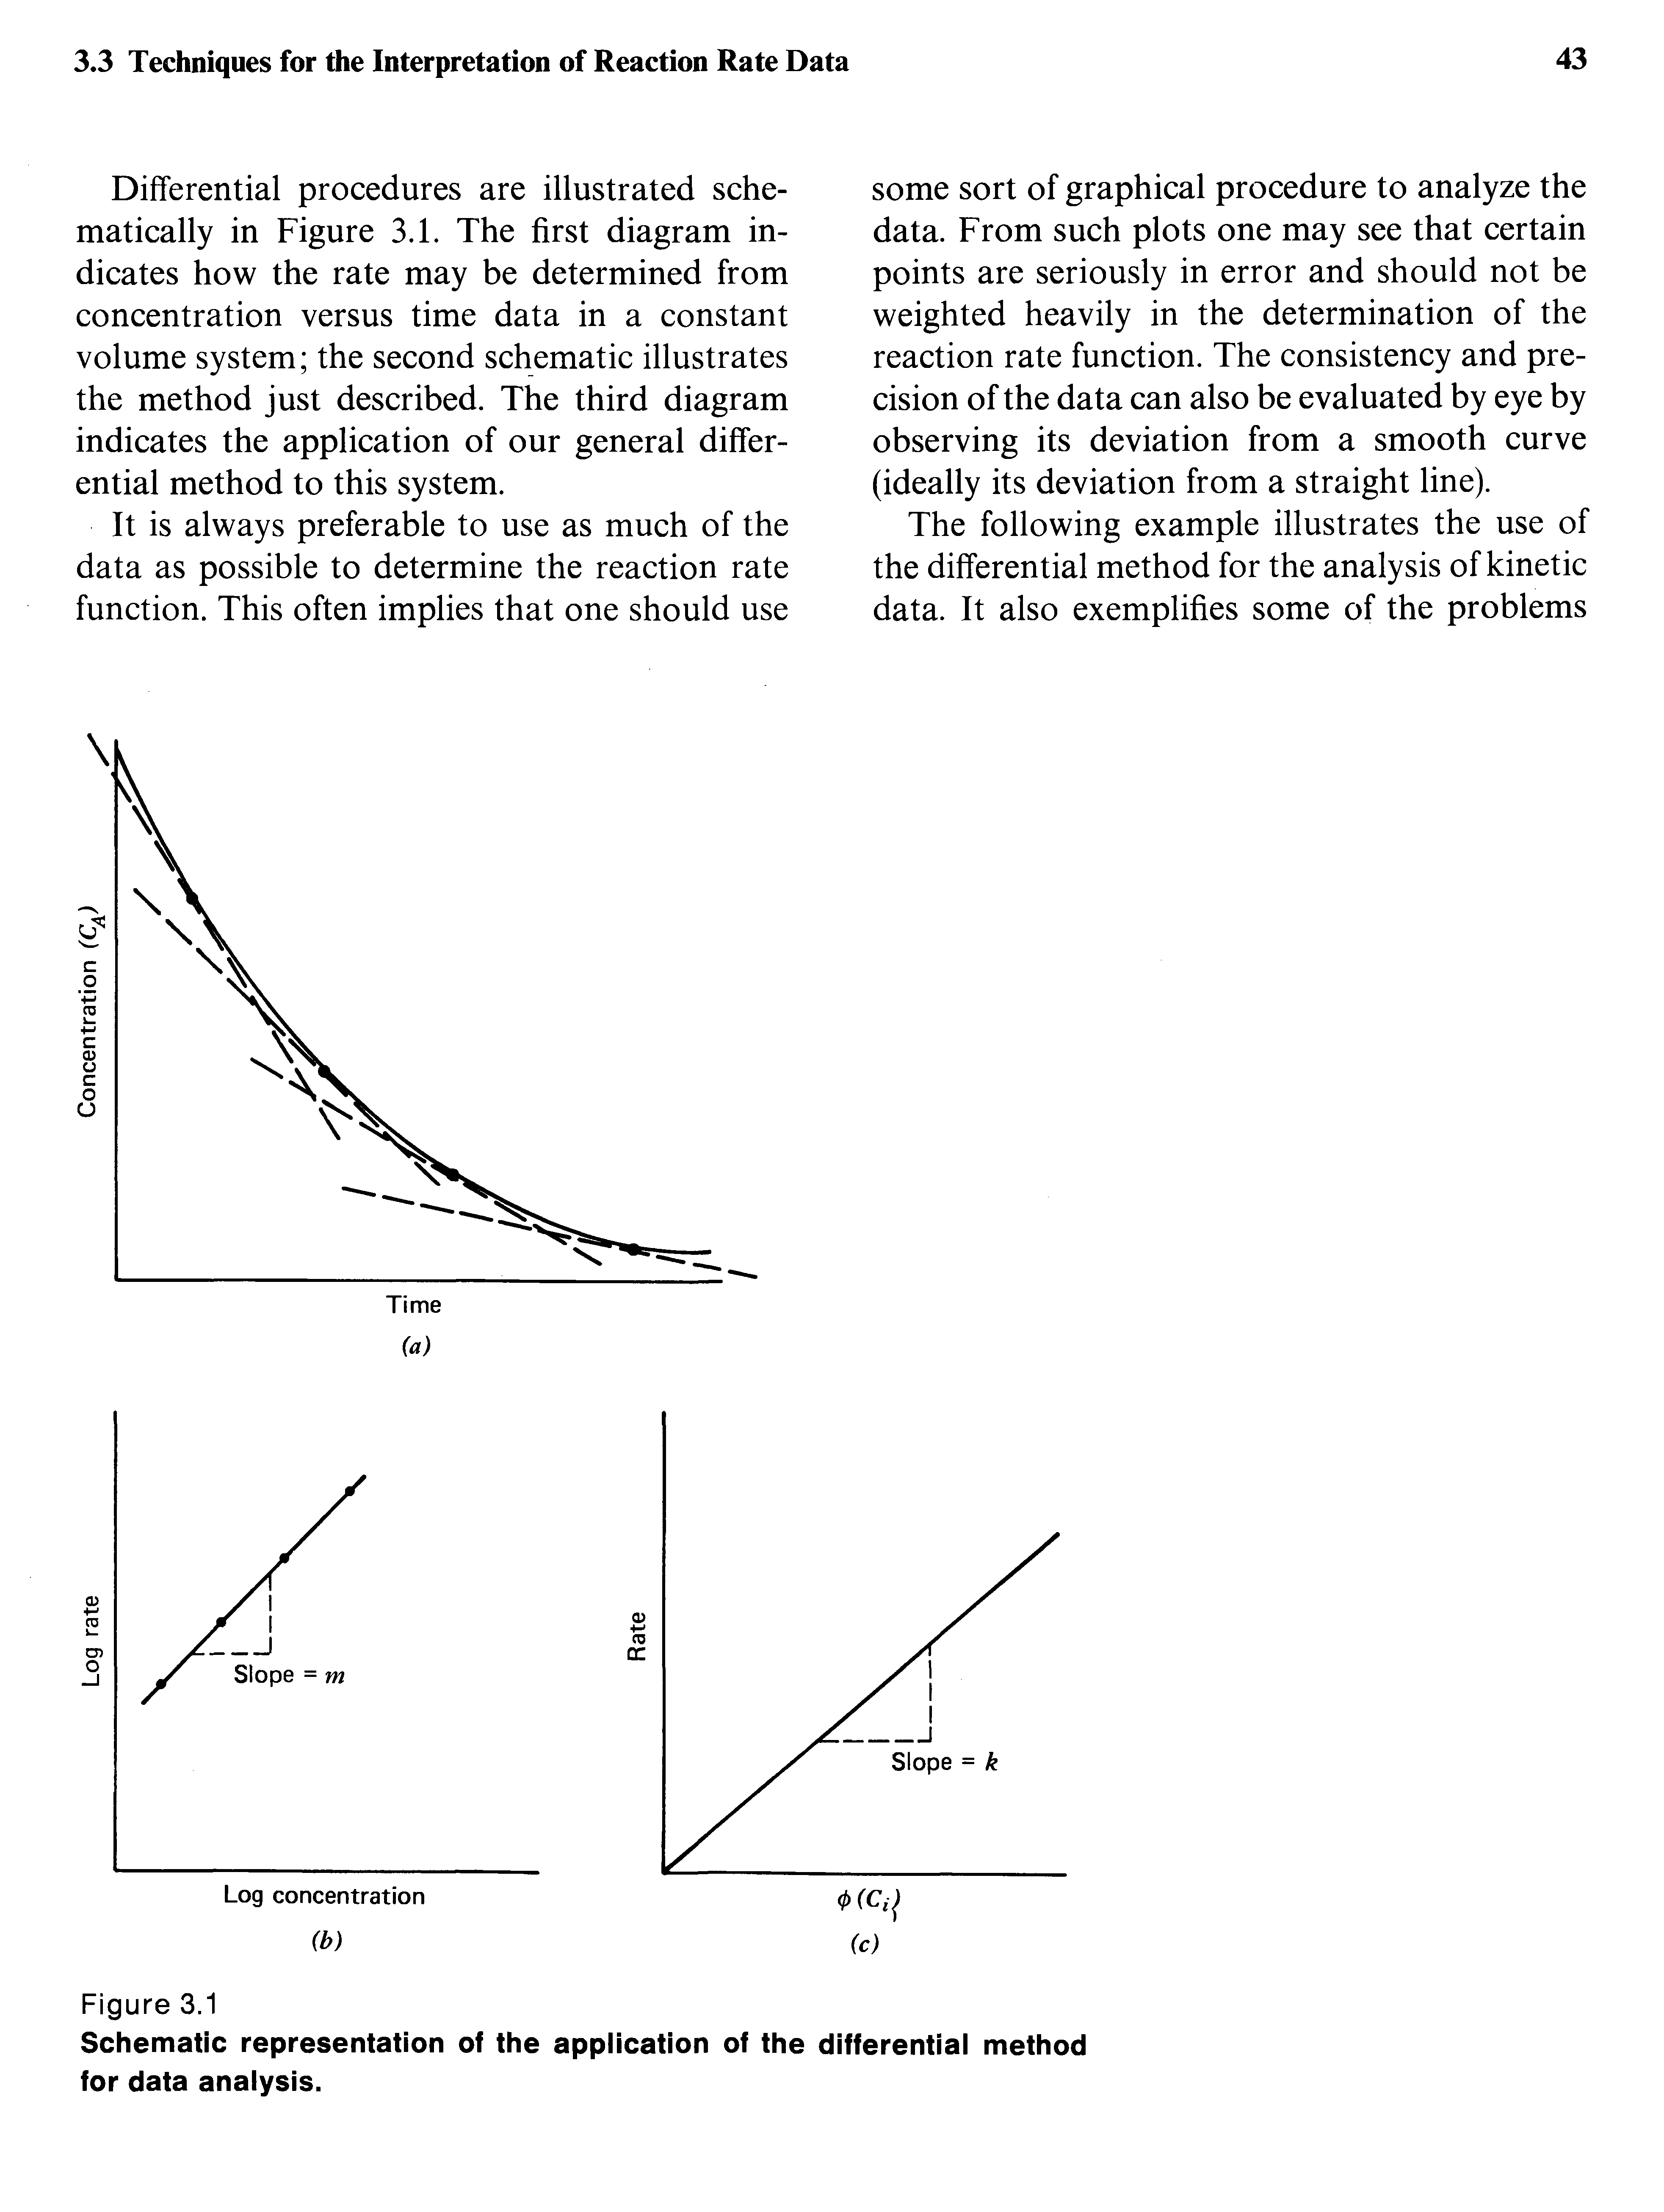 Schematic representation of the application of the differential method for data analysis.